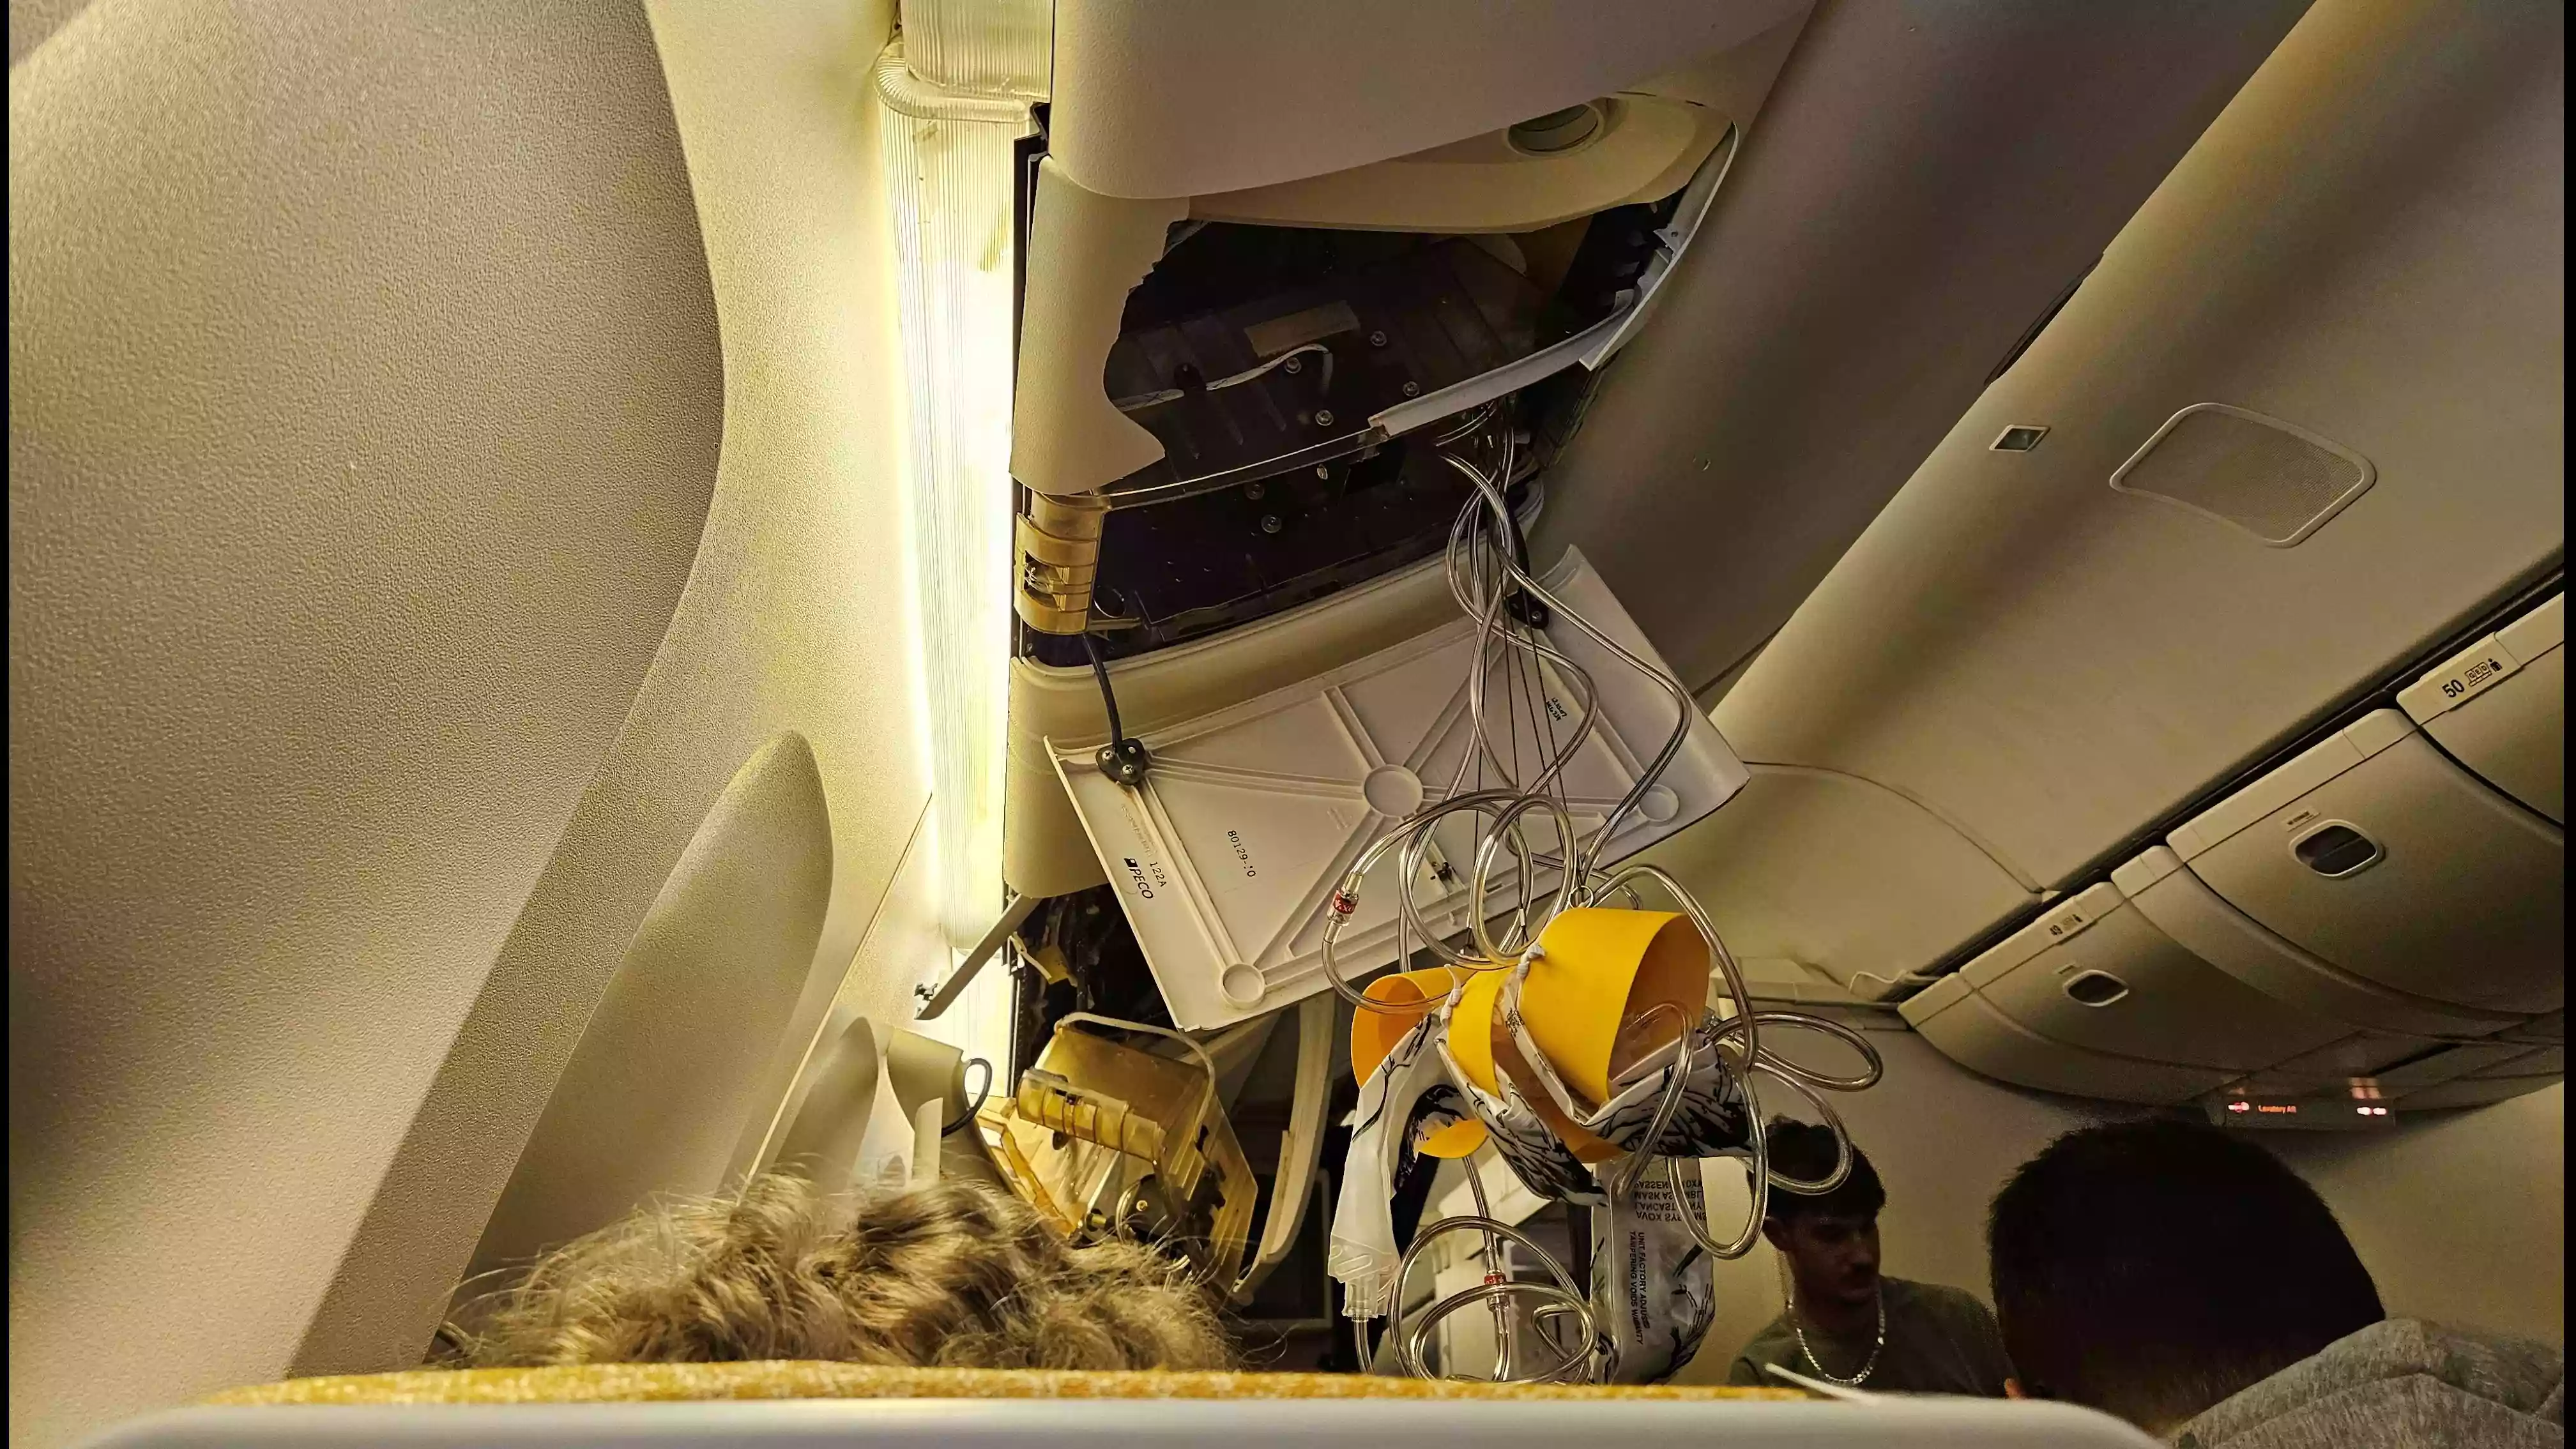 Singapore Airlines compensates 211 passengers after turbulence on SQ321 flight